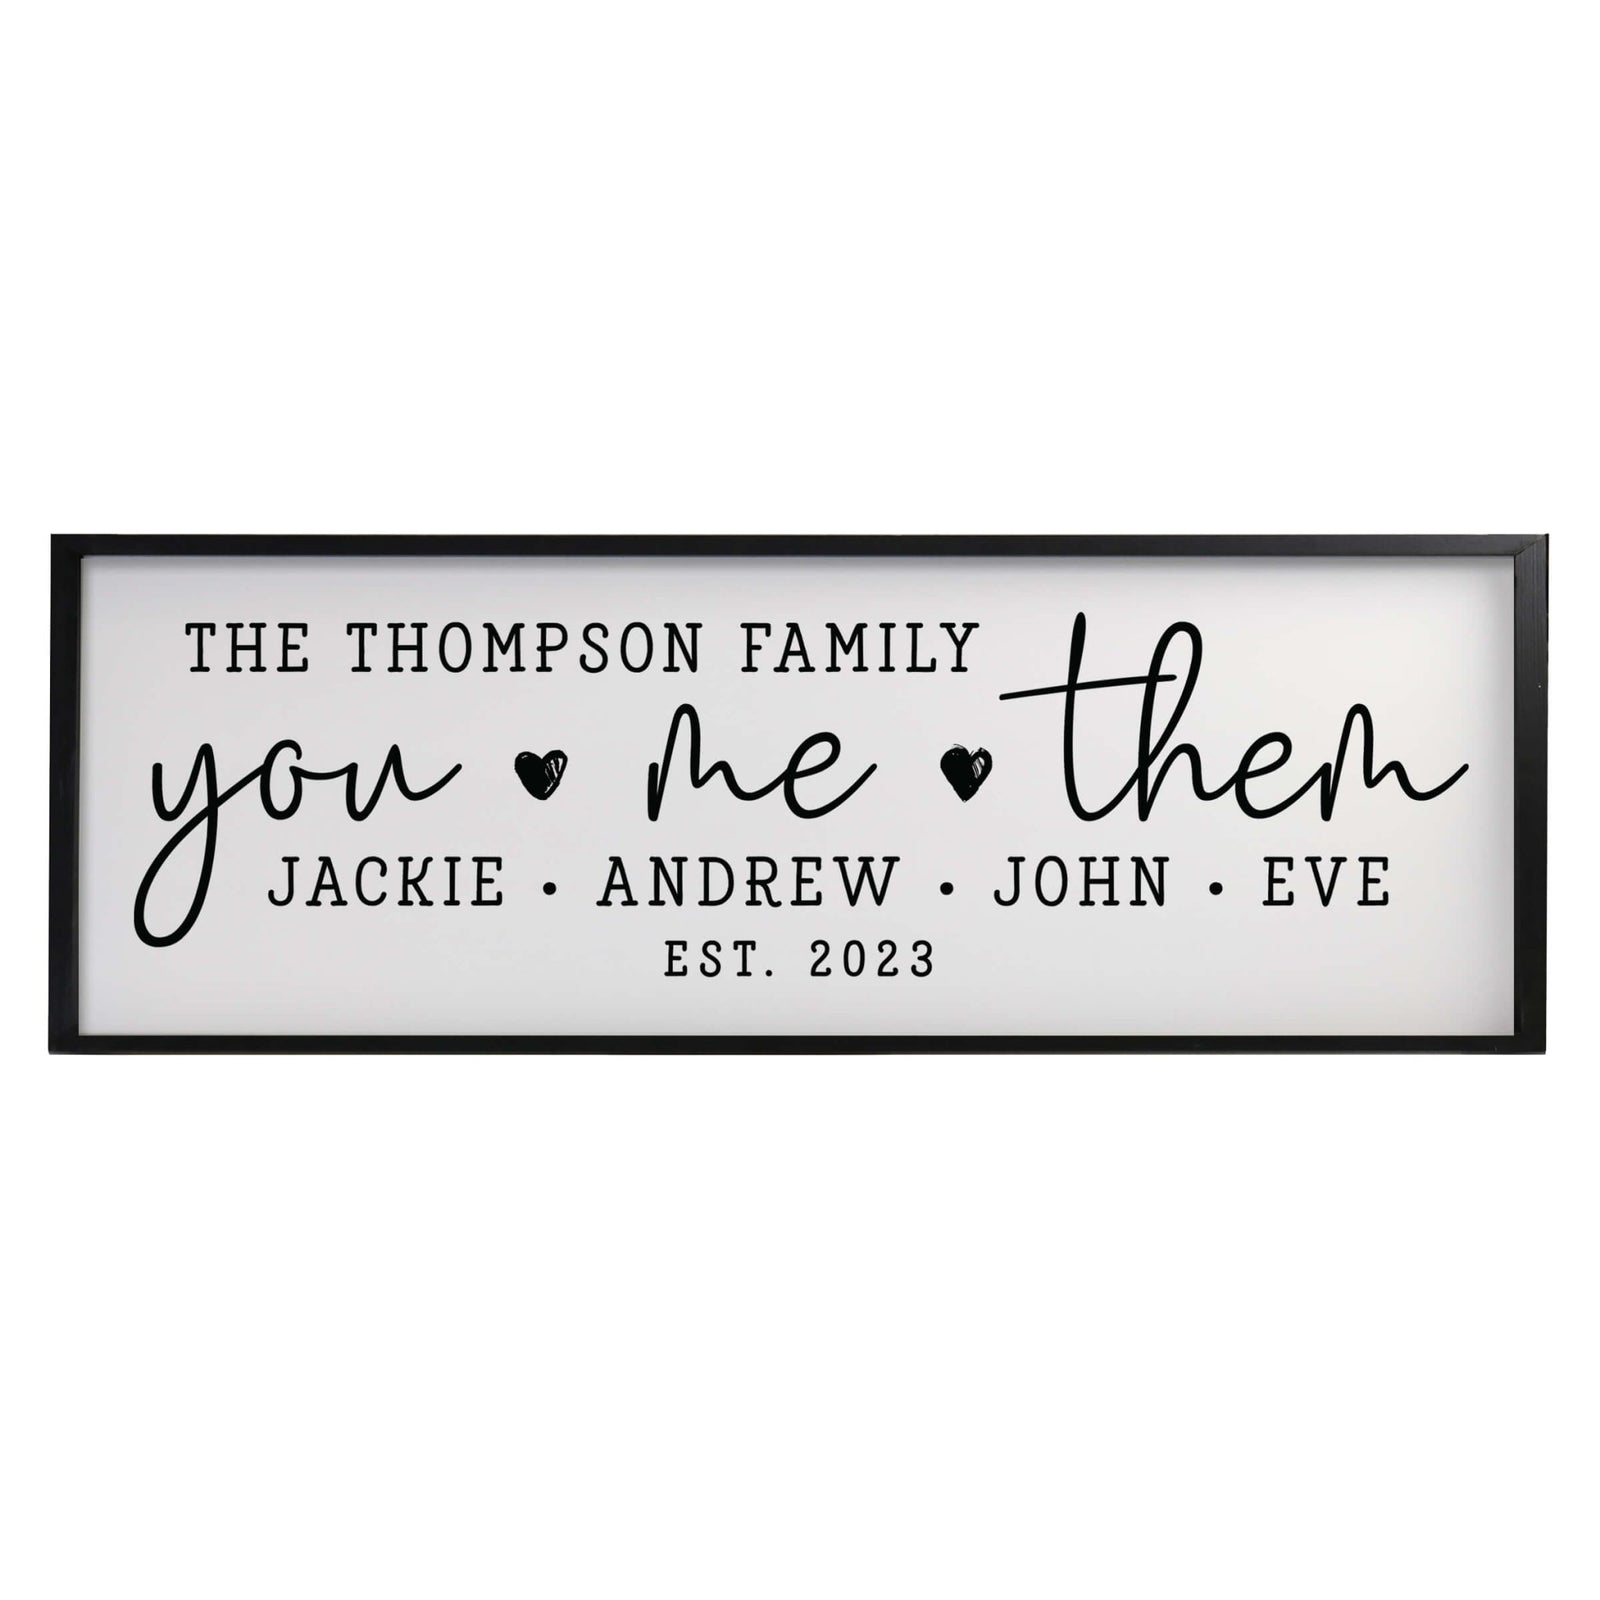 Personalized Family Wall Hanging Décor Framed Shadow Box For Home Décor - You , Me, Them - LifeSong Milestones